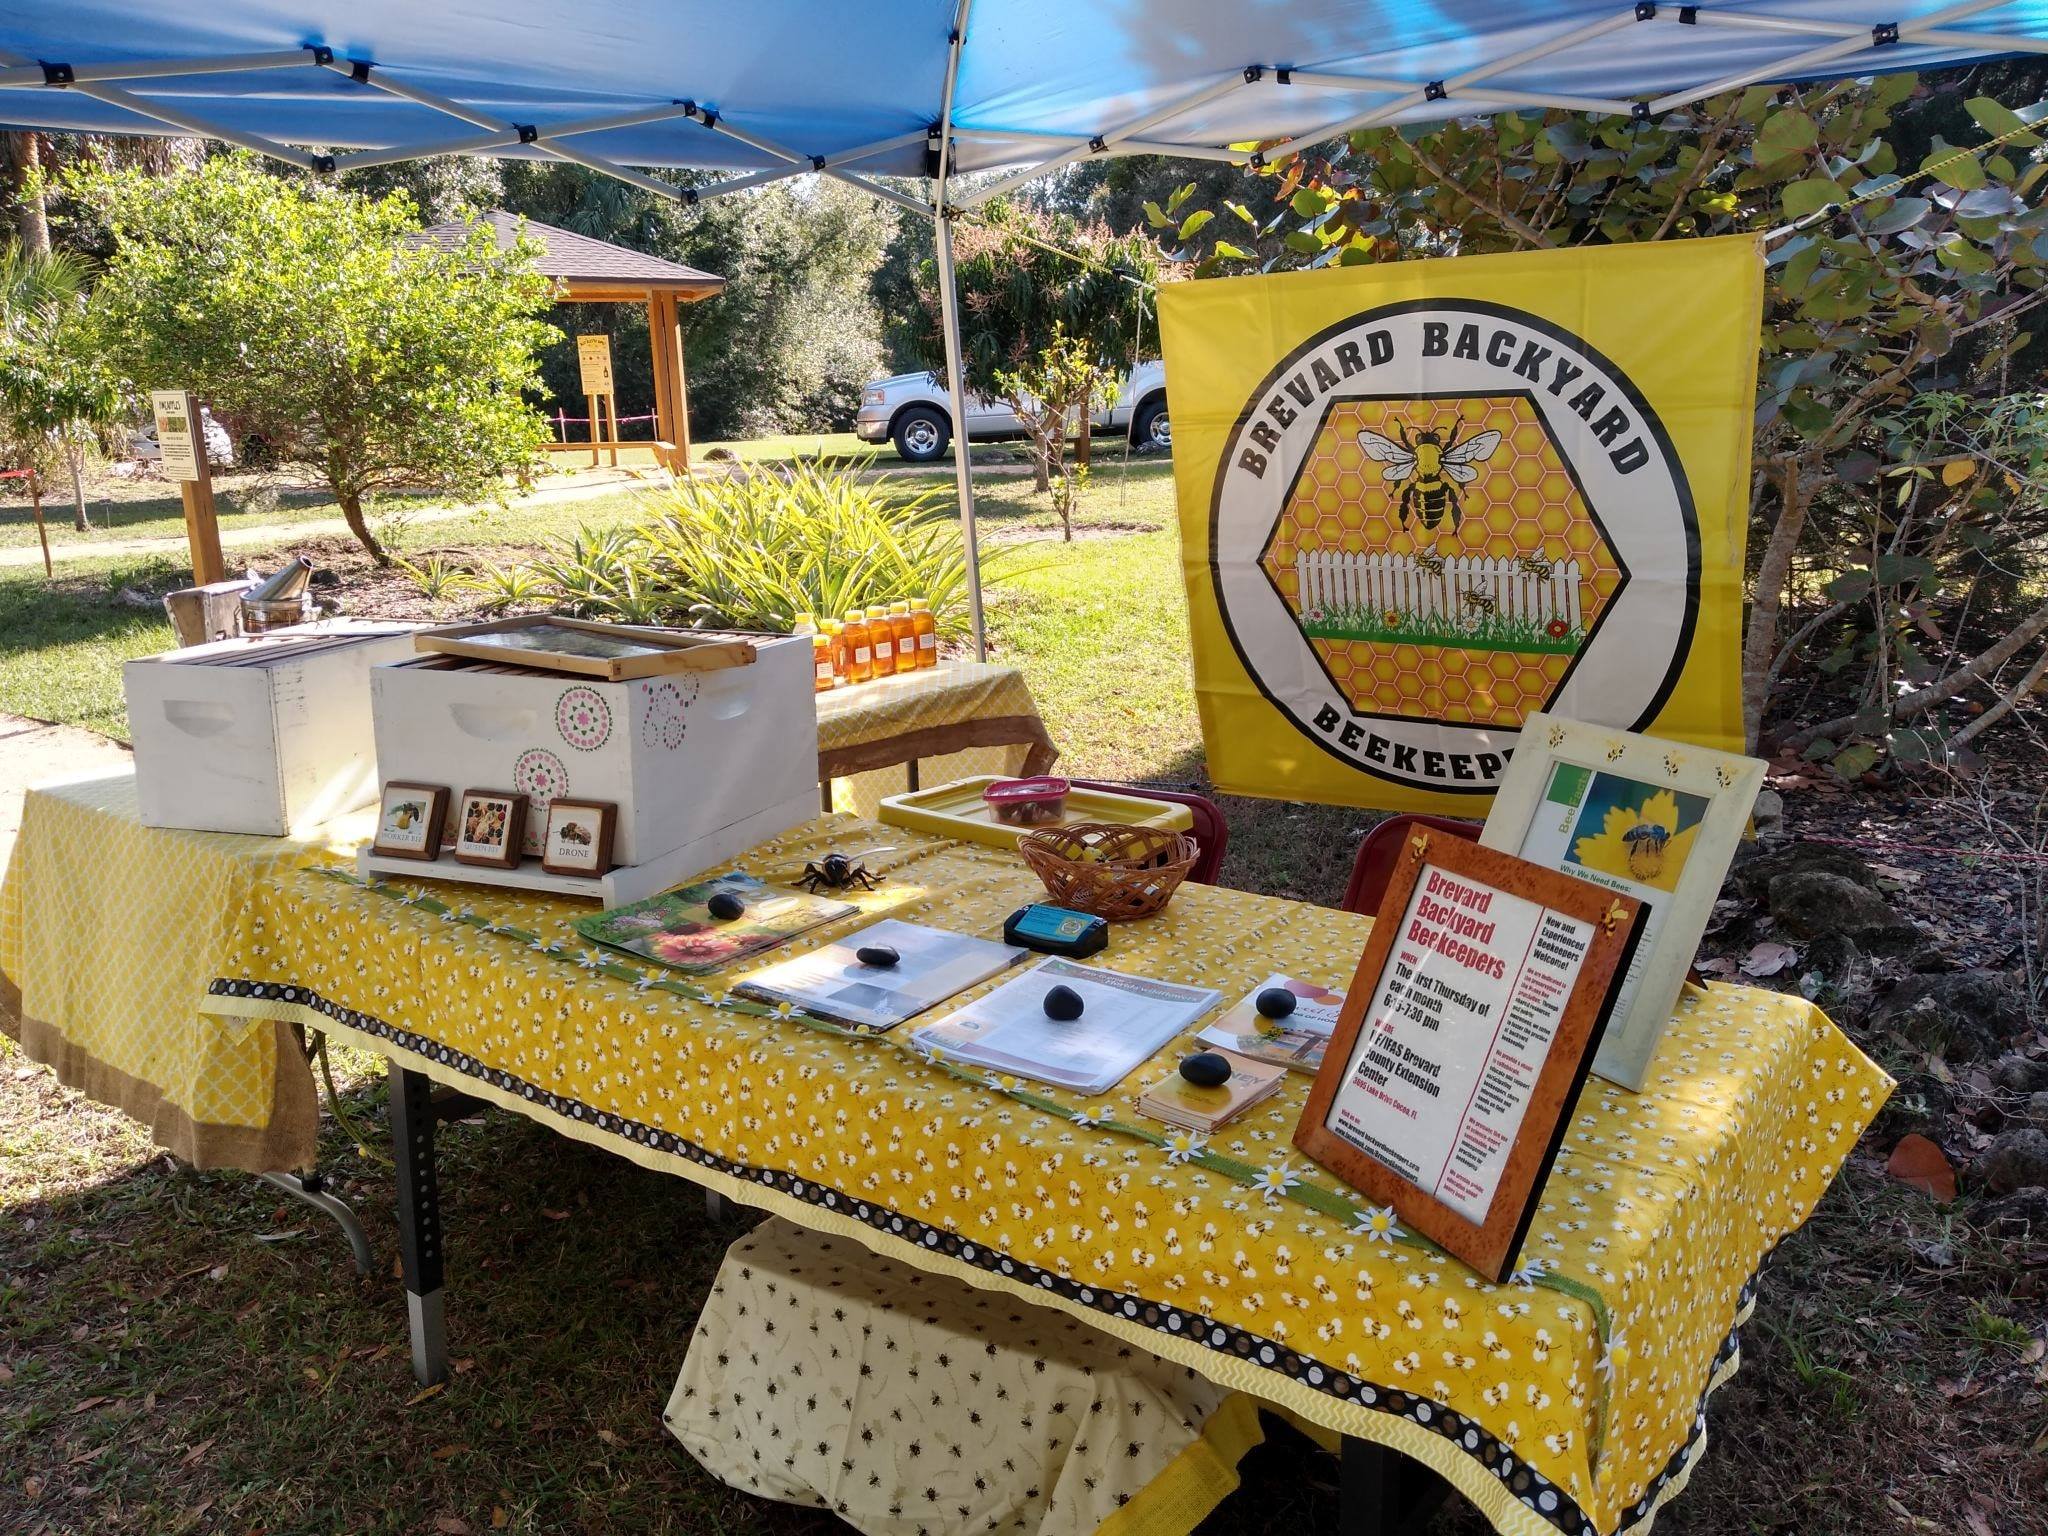 We can be found at beekeeping events throughout Florida